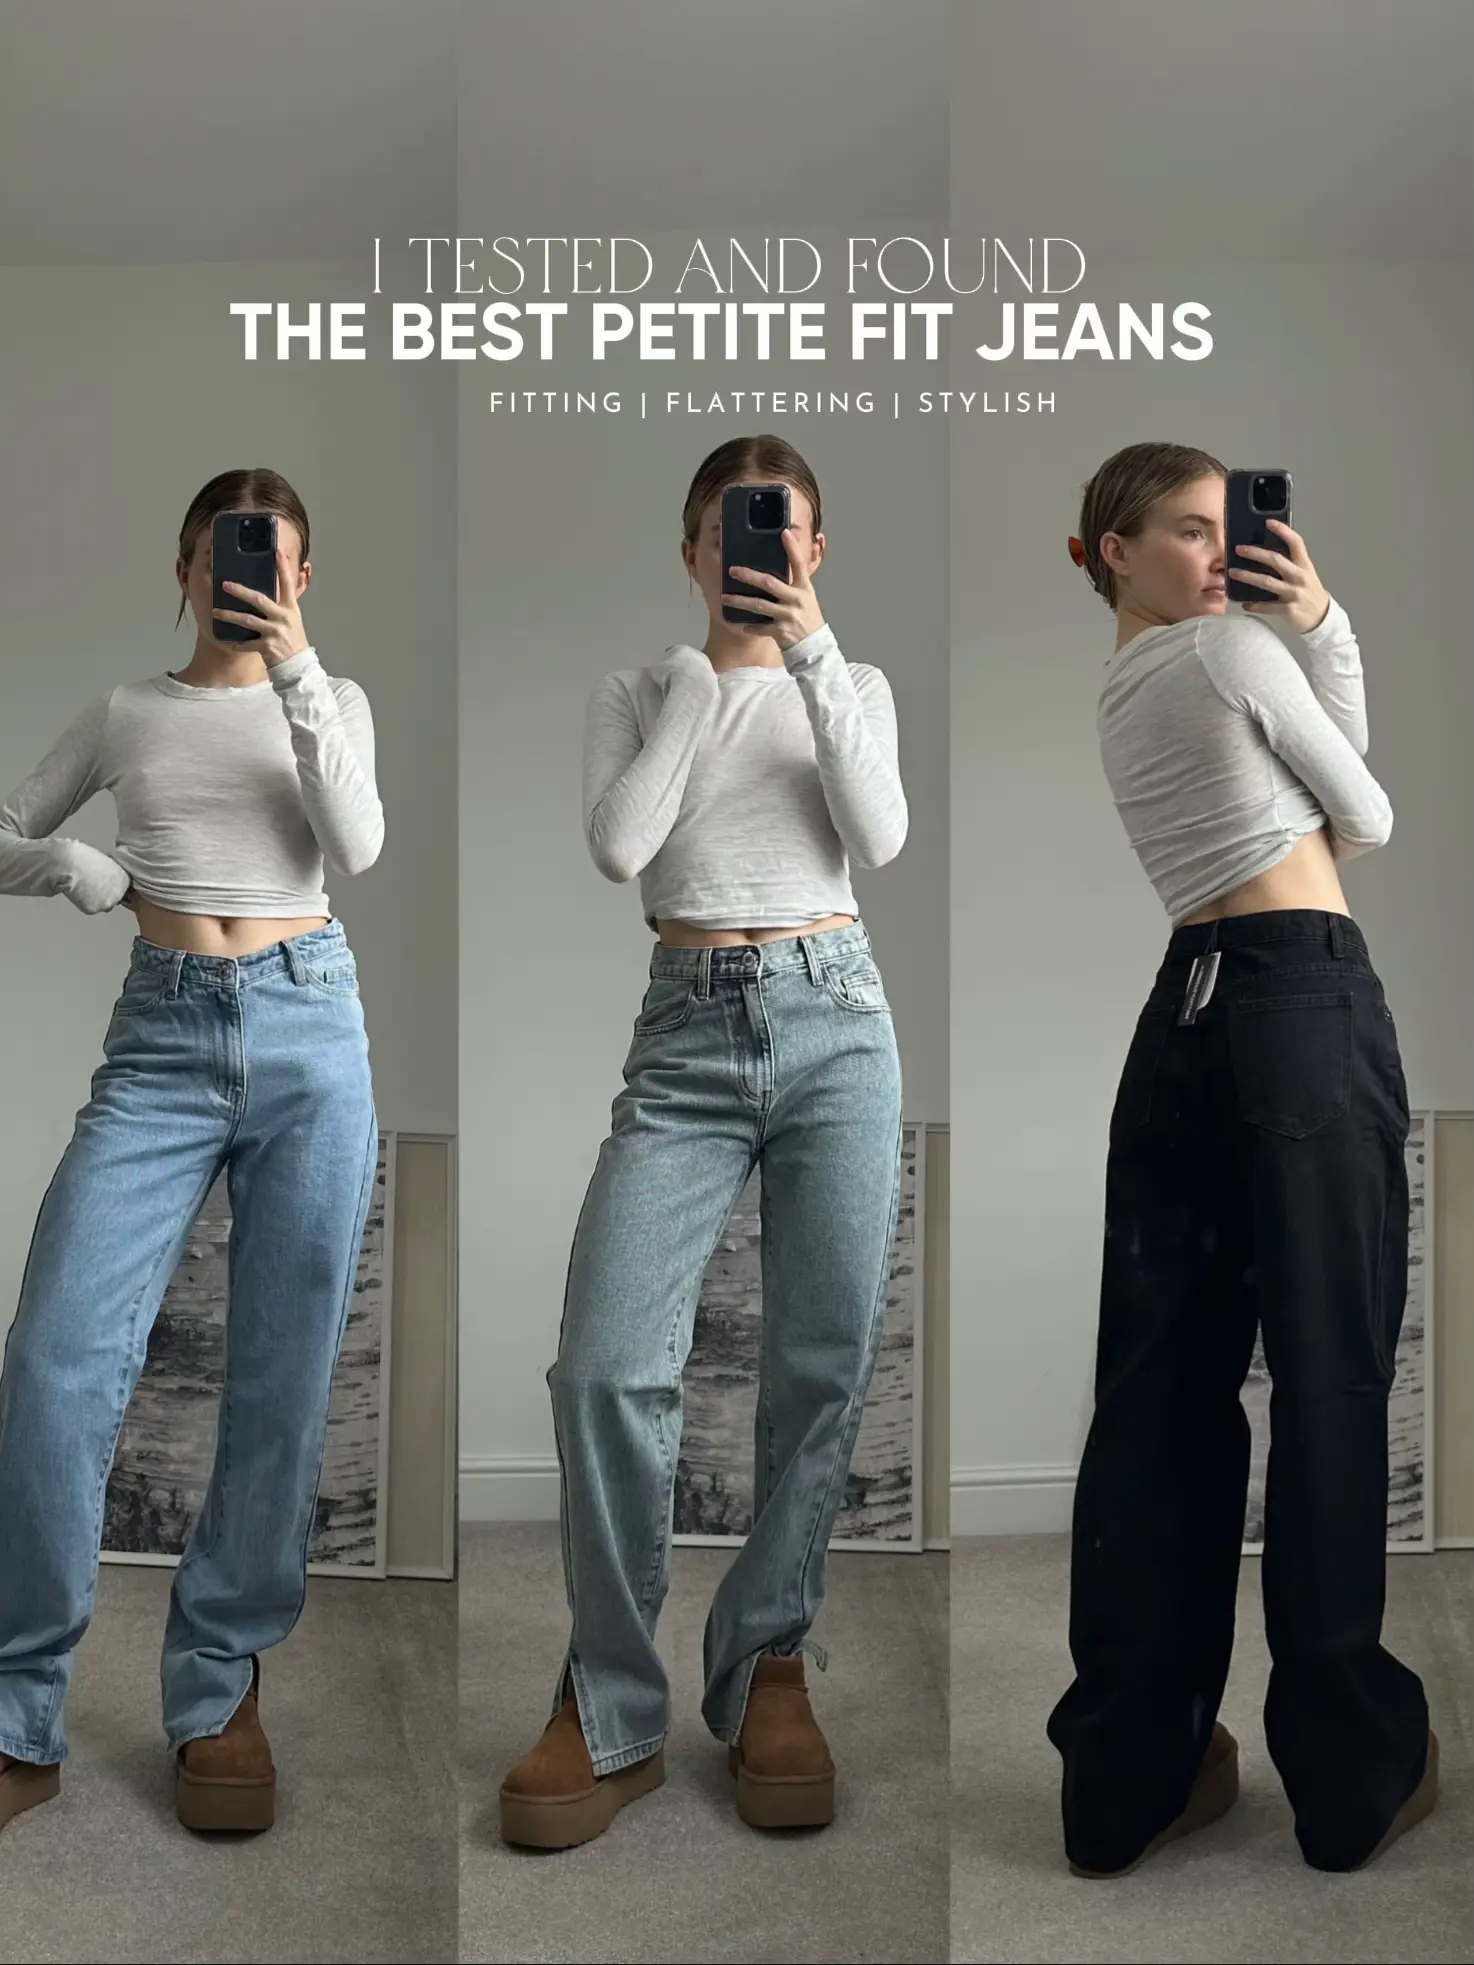 I did a PrettyLittleThing jean haul for my curvy girls - they all